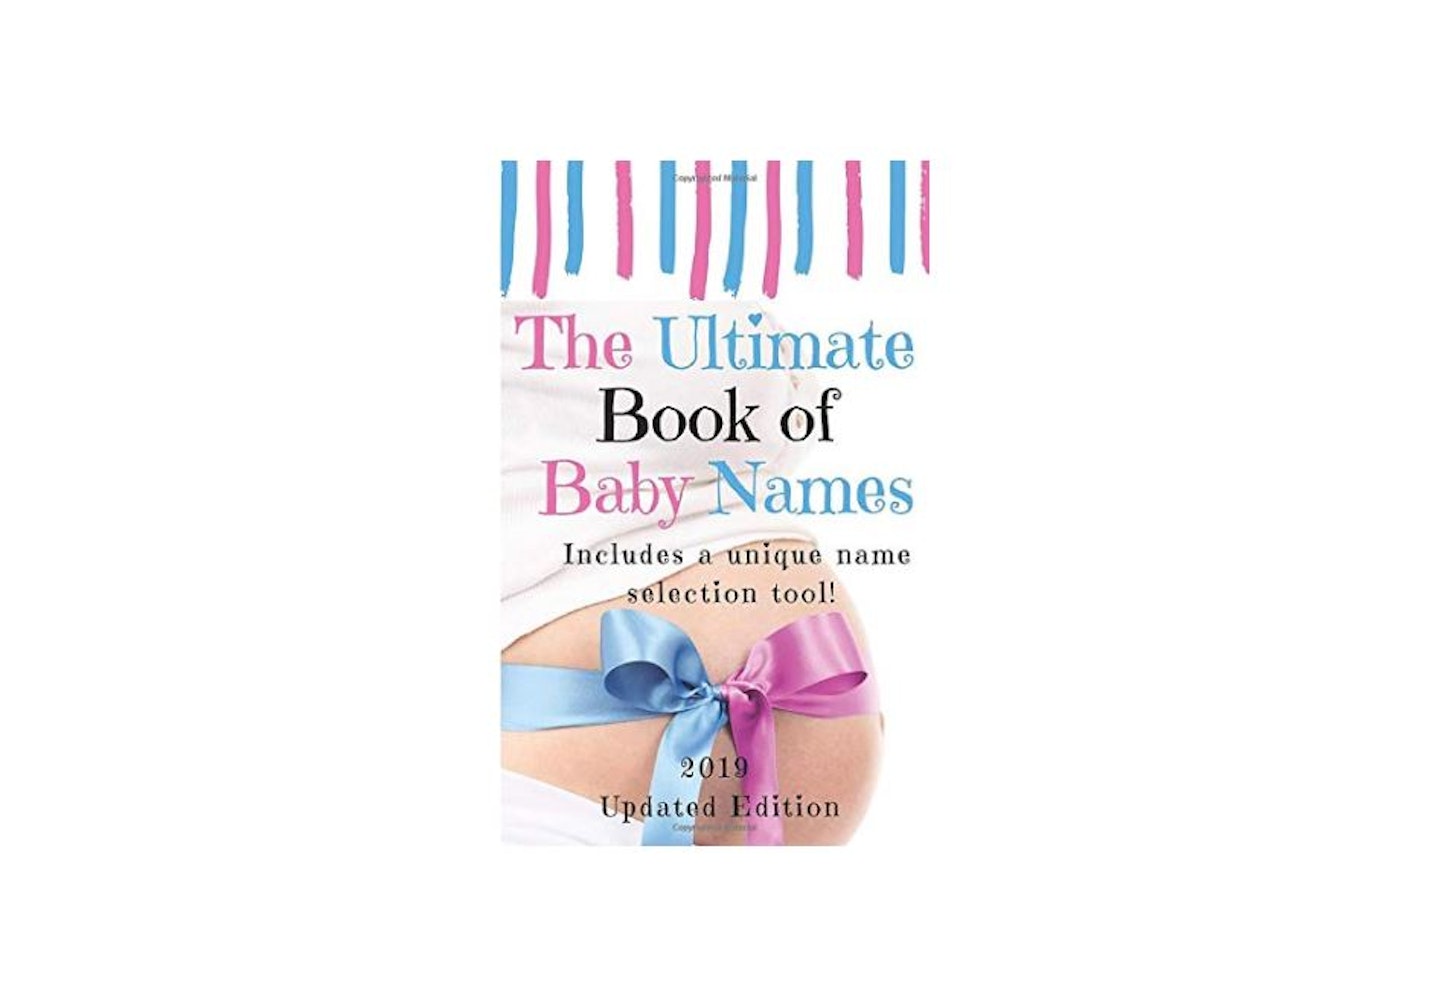 The Ultimate Book of Baby Names, 5.99